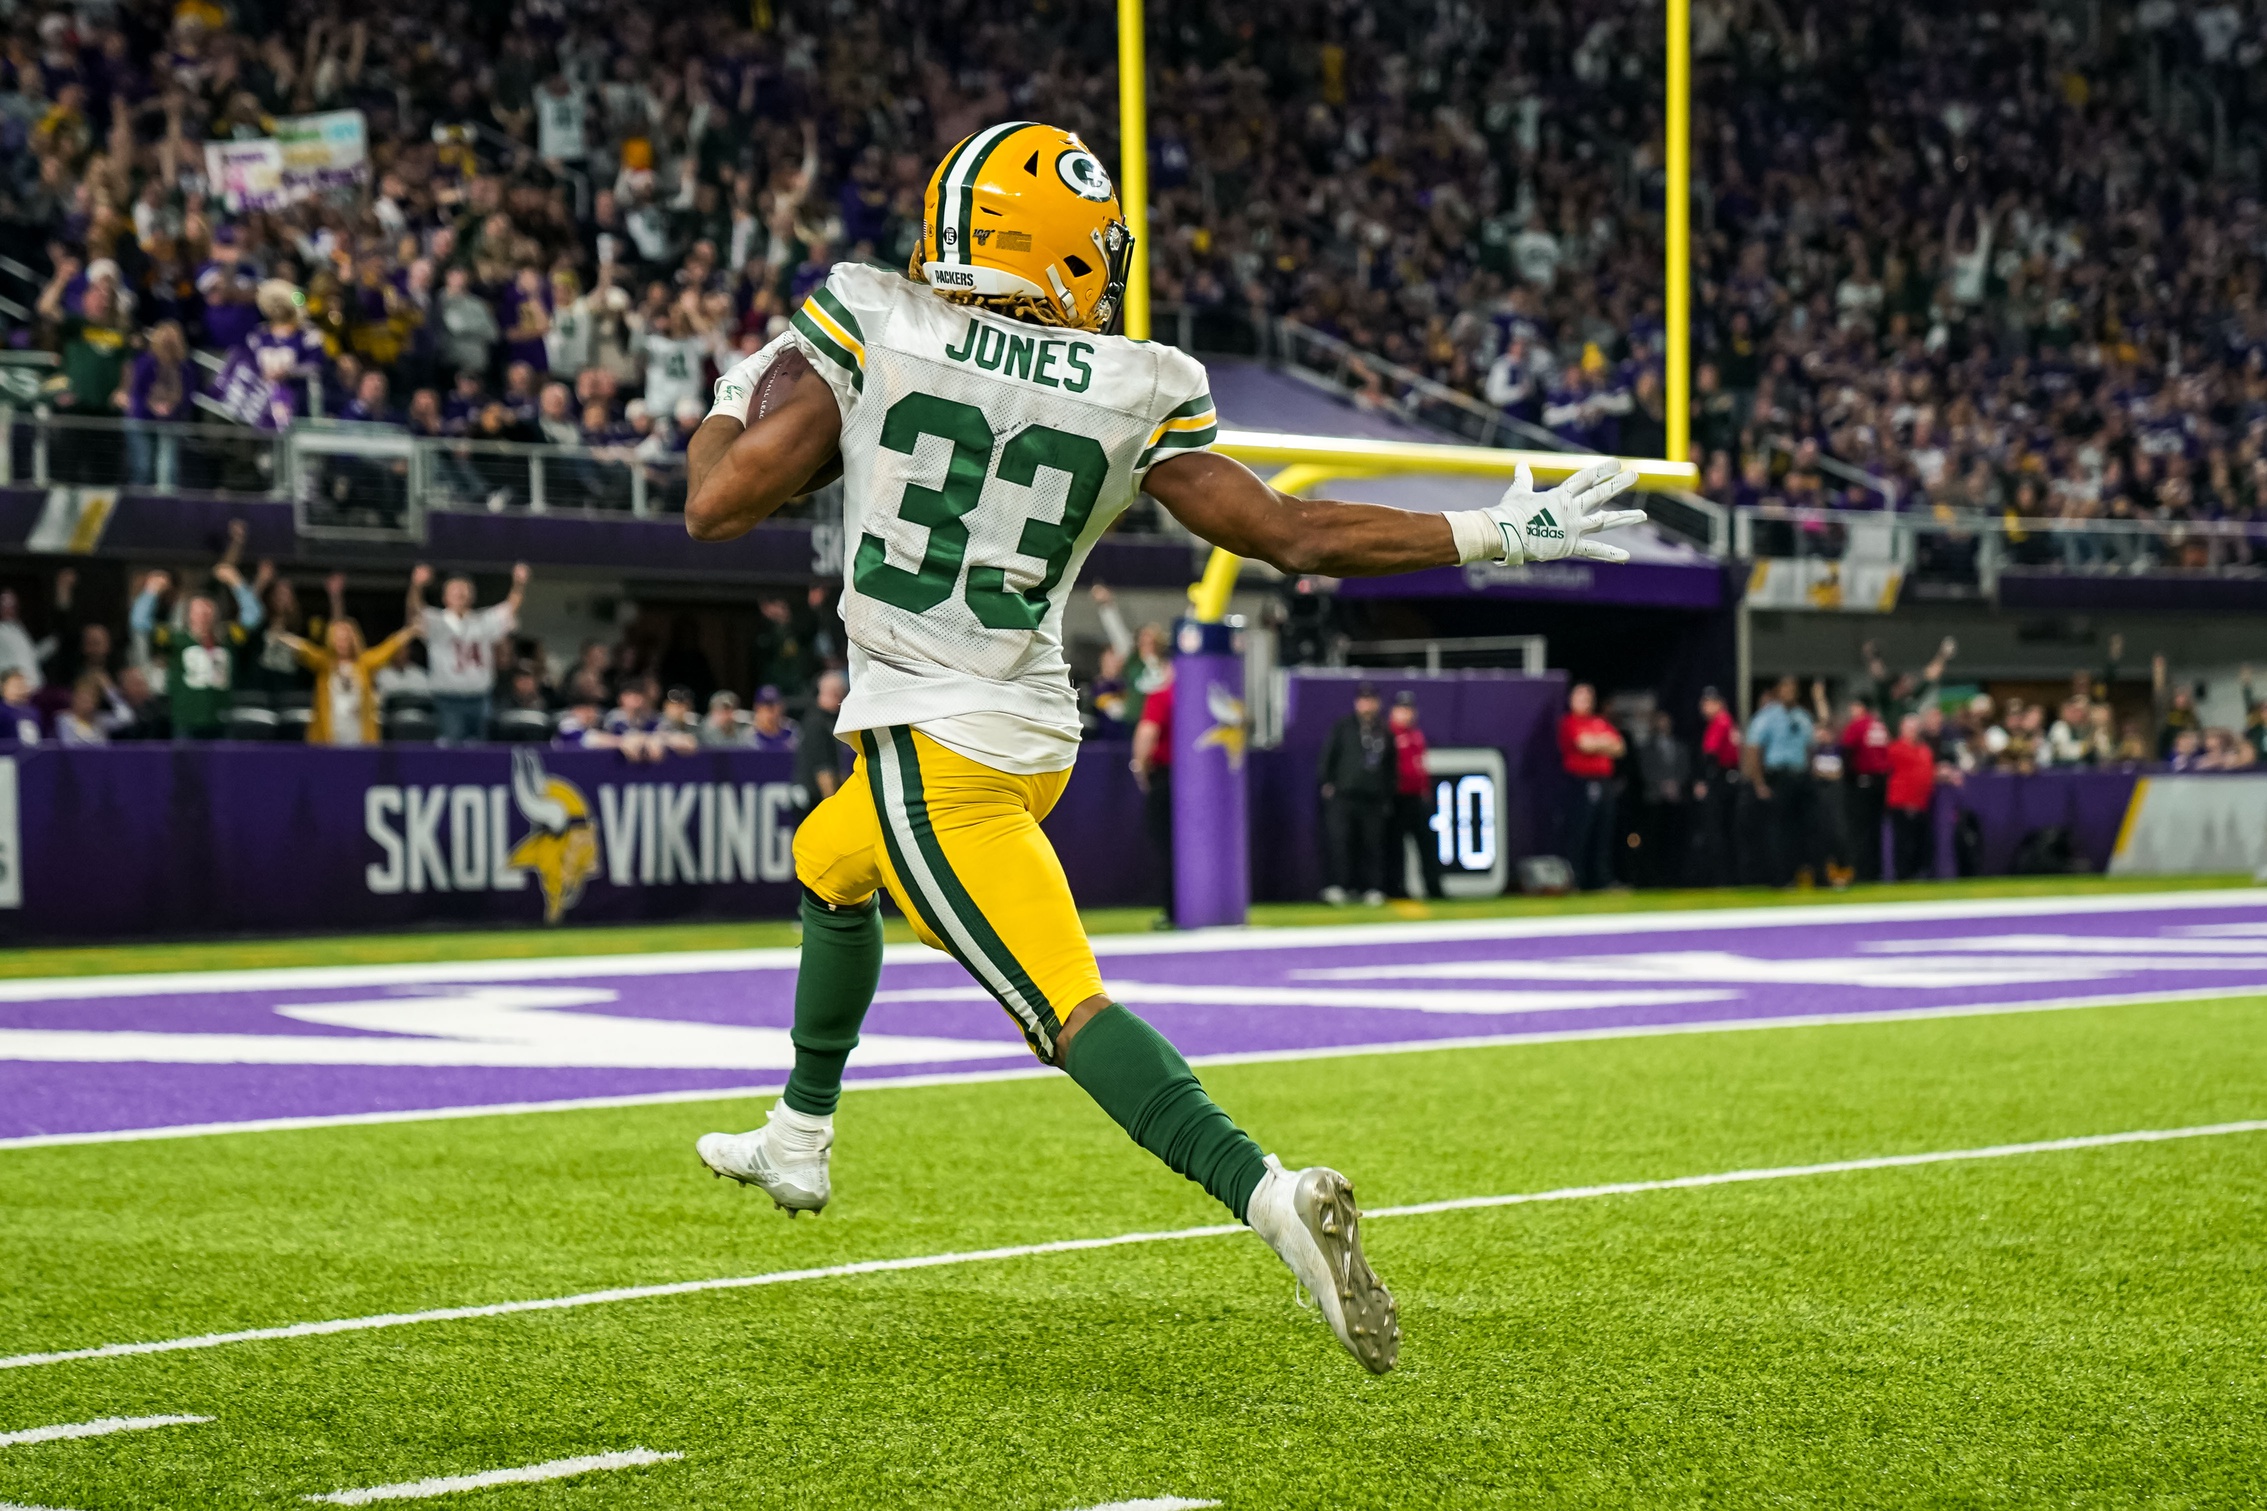 Packers' Aaron Jones pays homage to Marshawn Lynch on touchdown run